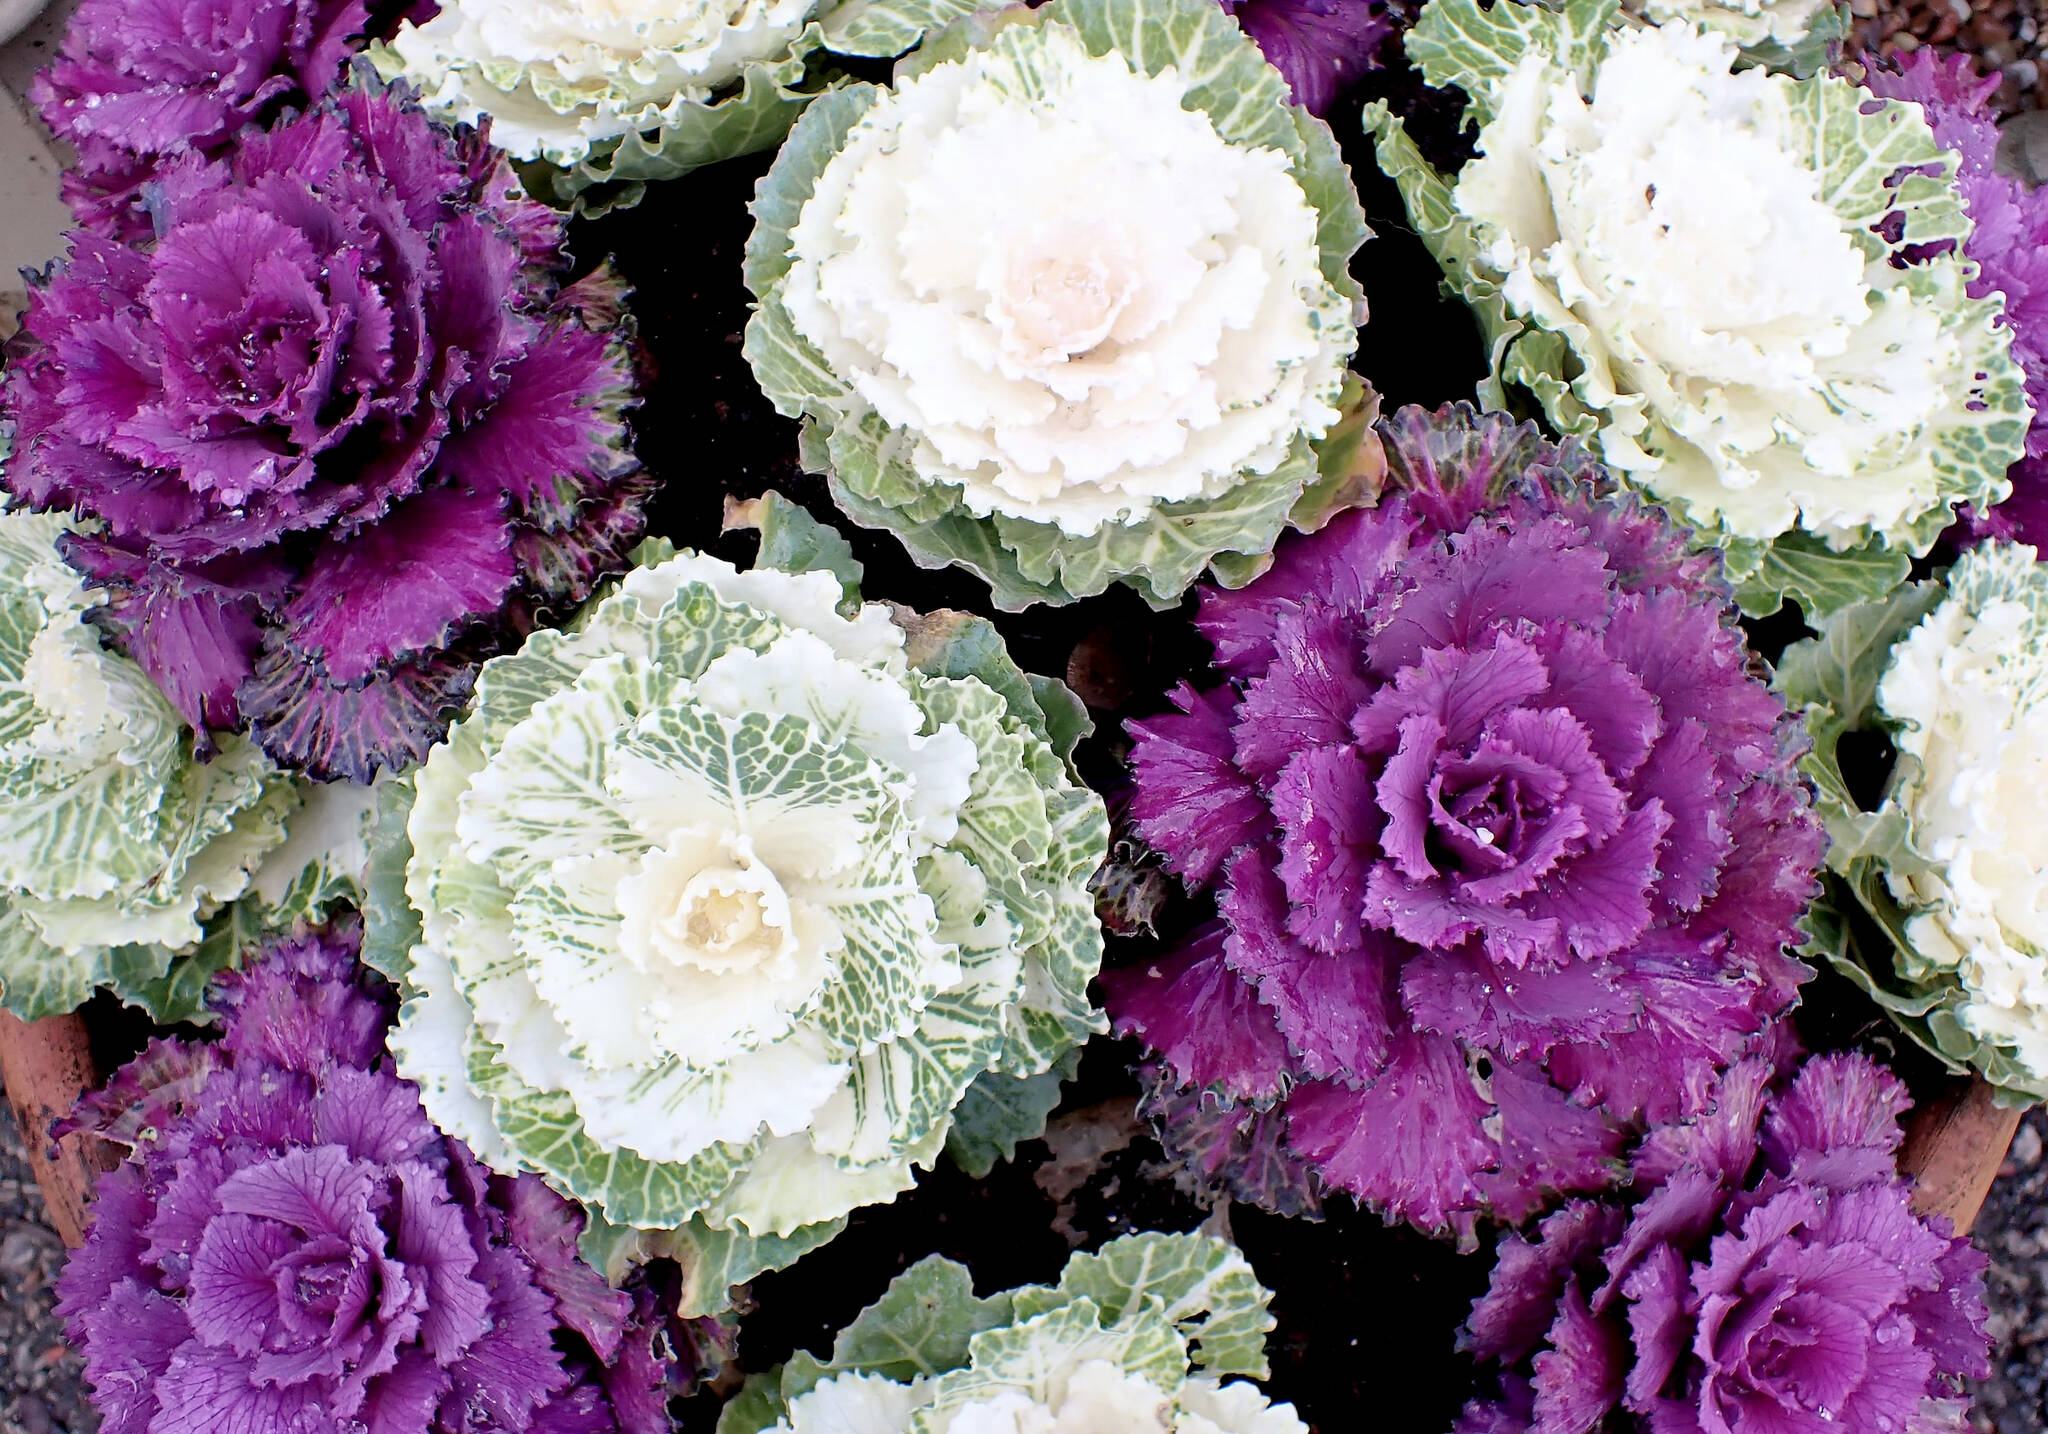 Nancy Hughes via Unsplash
Ornamental Cabbage (Brassica Oleracea) can give your garden color and interest though the winter.